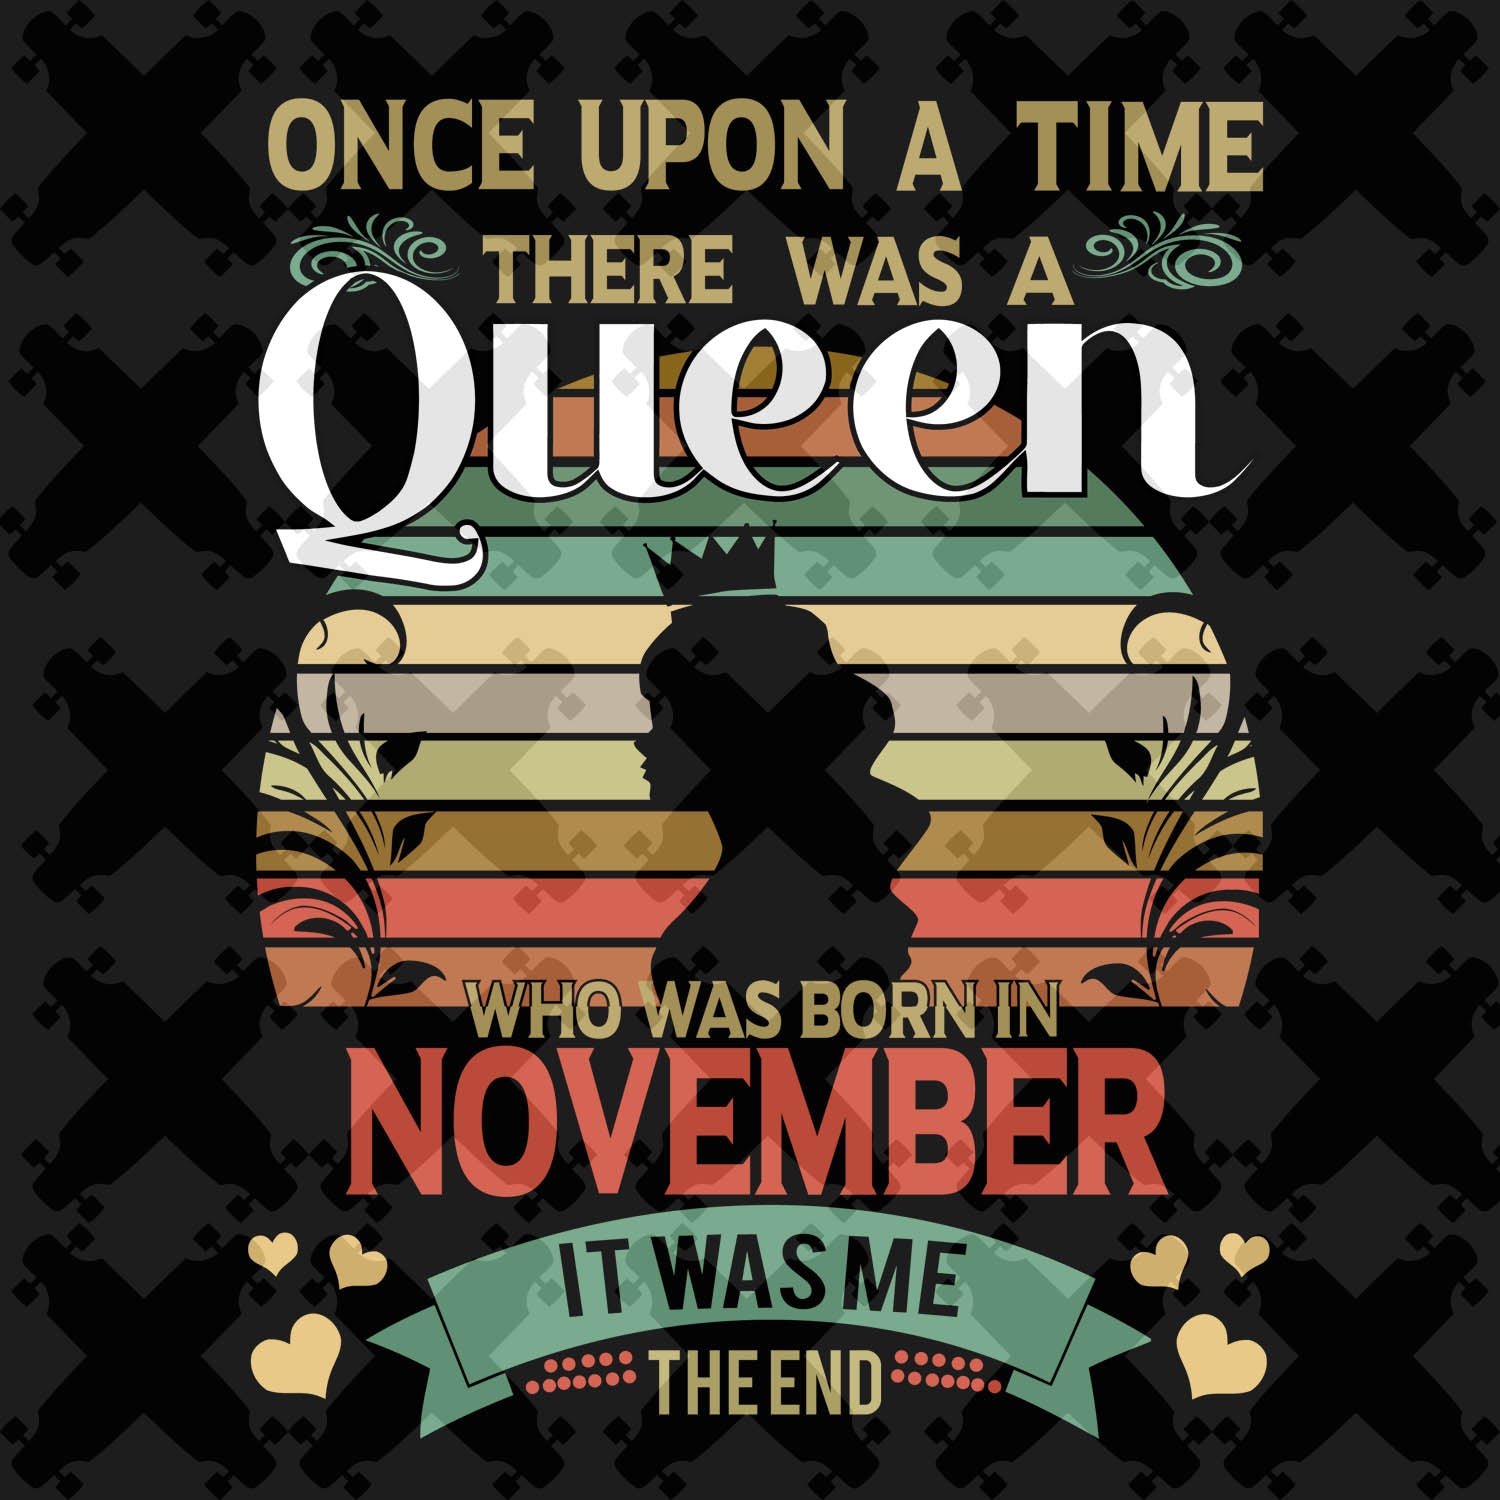 Download There was a queen who was born in November, retro vintage ...